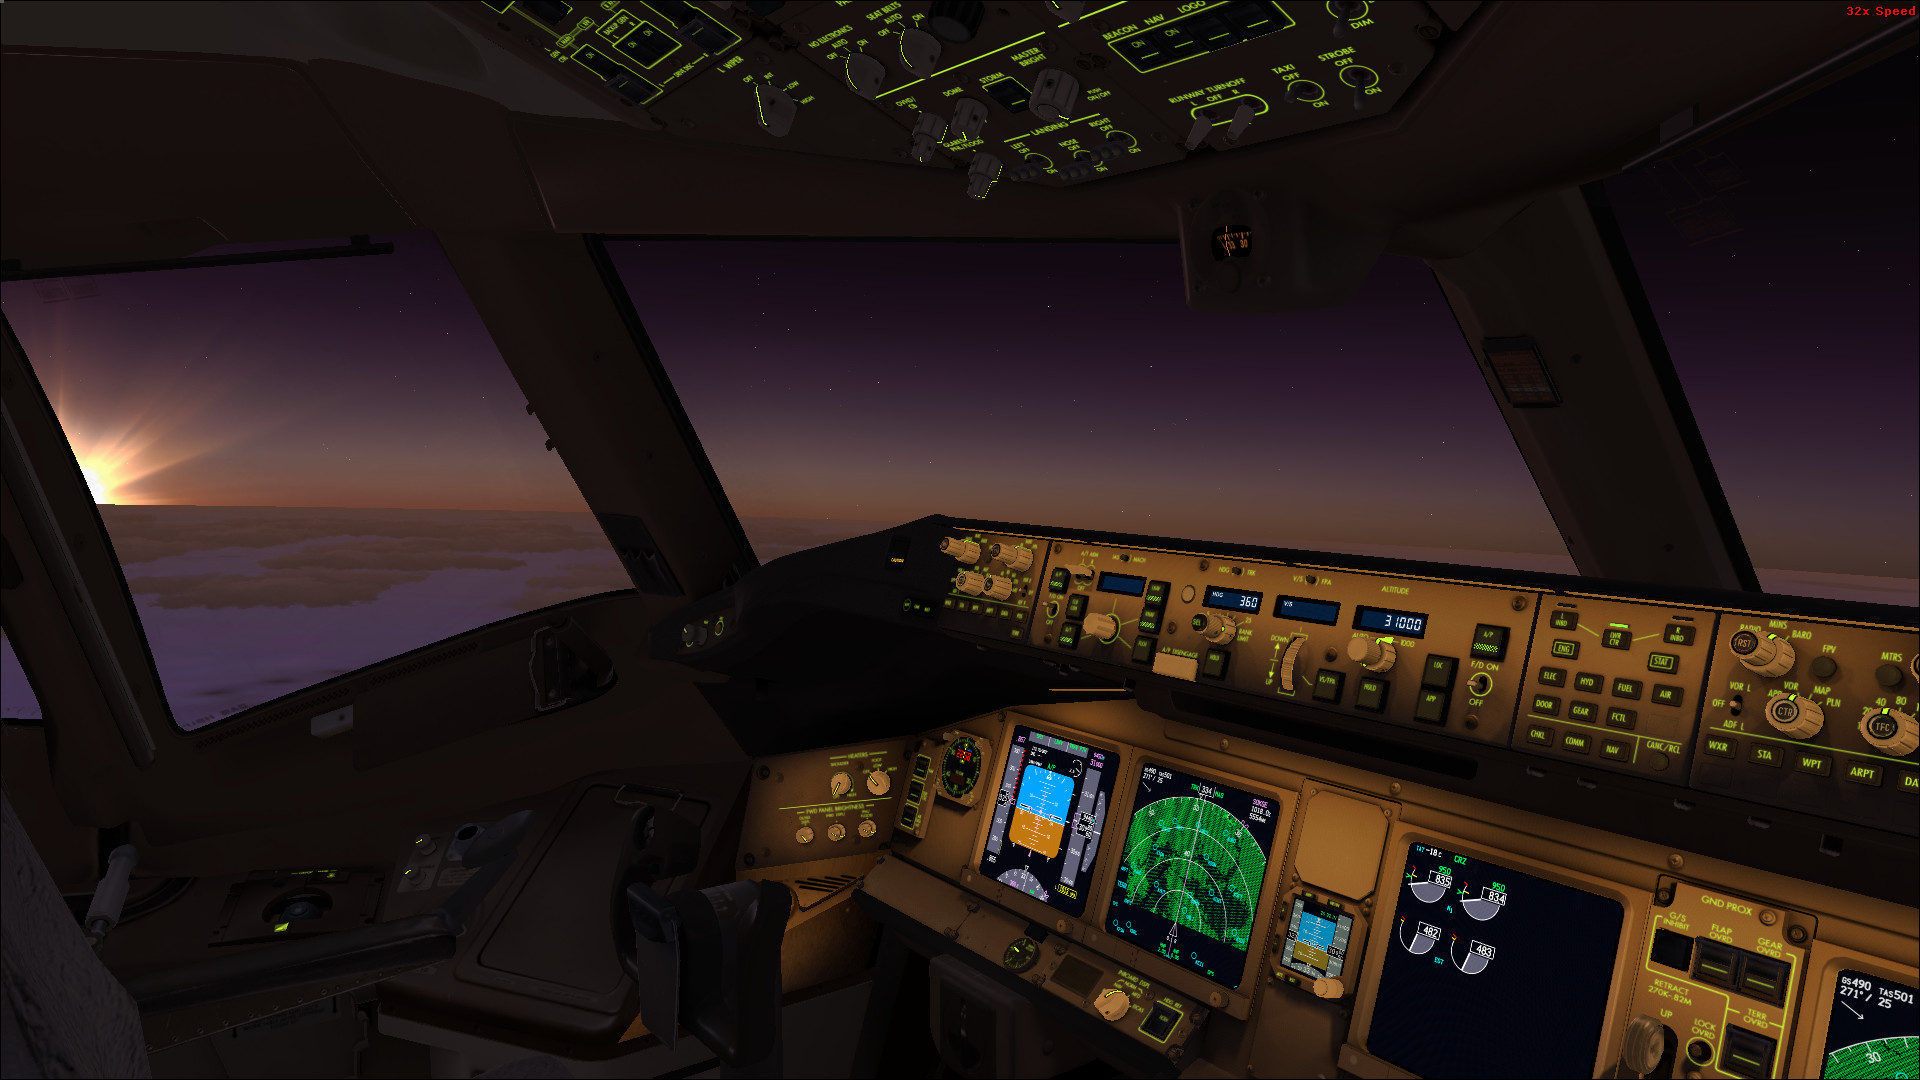 1920x1080 ... Boeing 777 cockpit dusk by HYPPthe